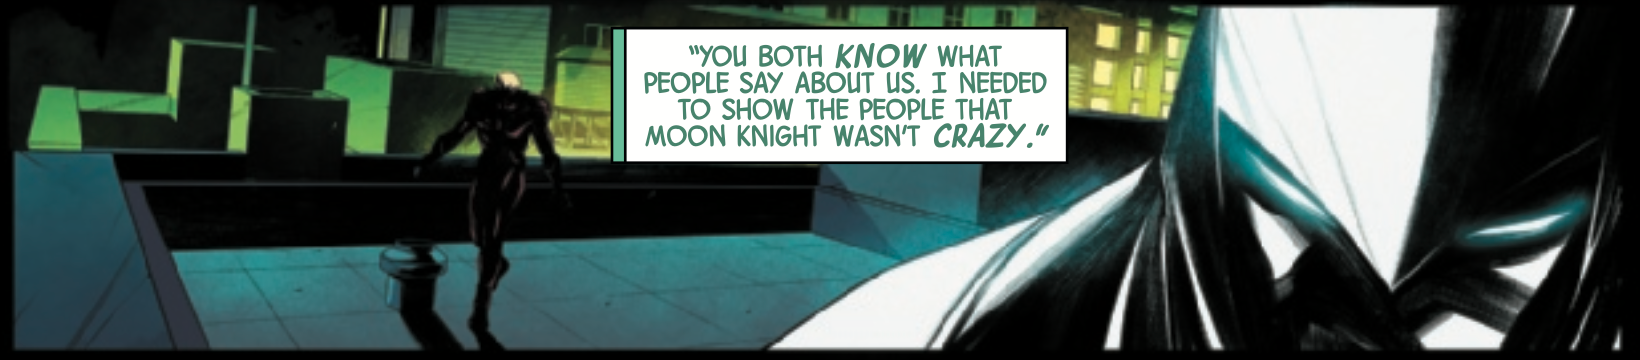 Moon Knight stands on a rooftop at night; a dark figure looms behind him. He says, "You both know what people say about us. I needed to show the people that Moon Knight wasn't crazy."